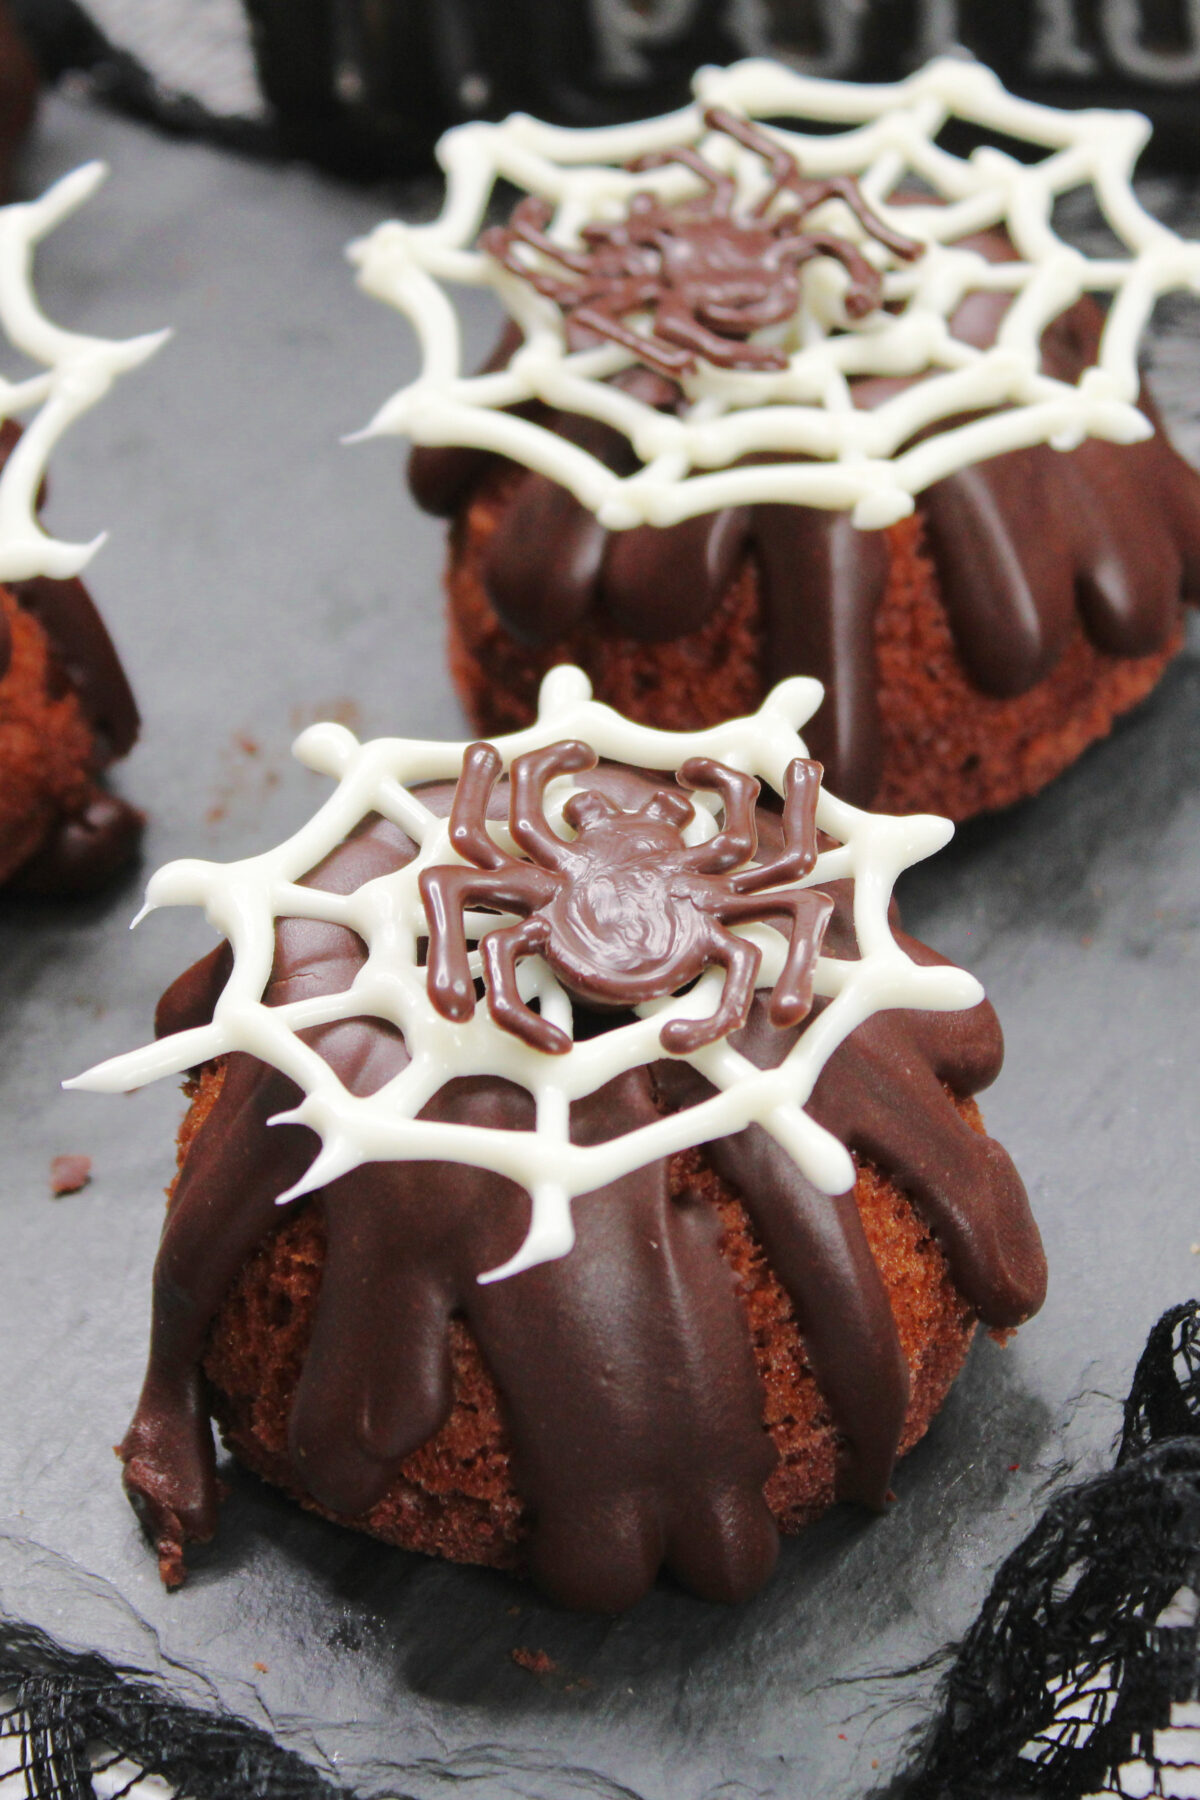 Get creative this Halloween and whip up these spooky, yet delicious mini spider bundt cakes decorated with chocolate spiders and webs.